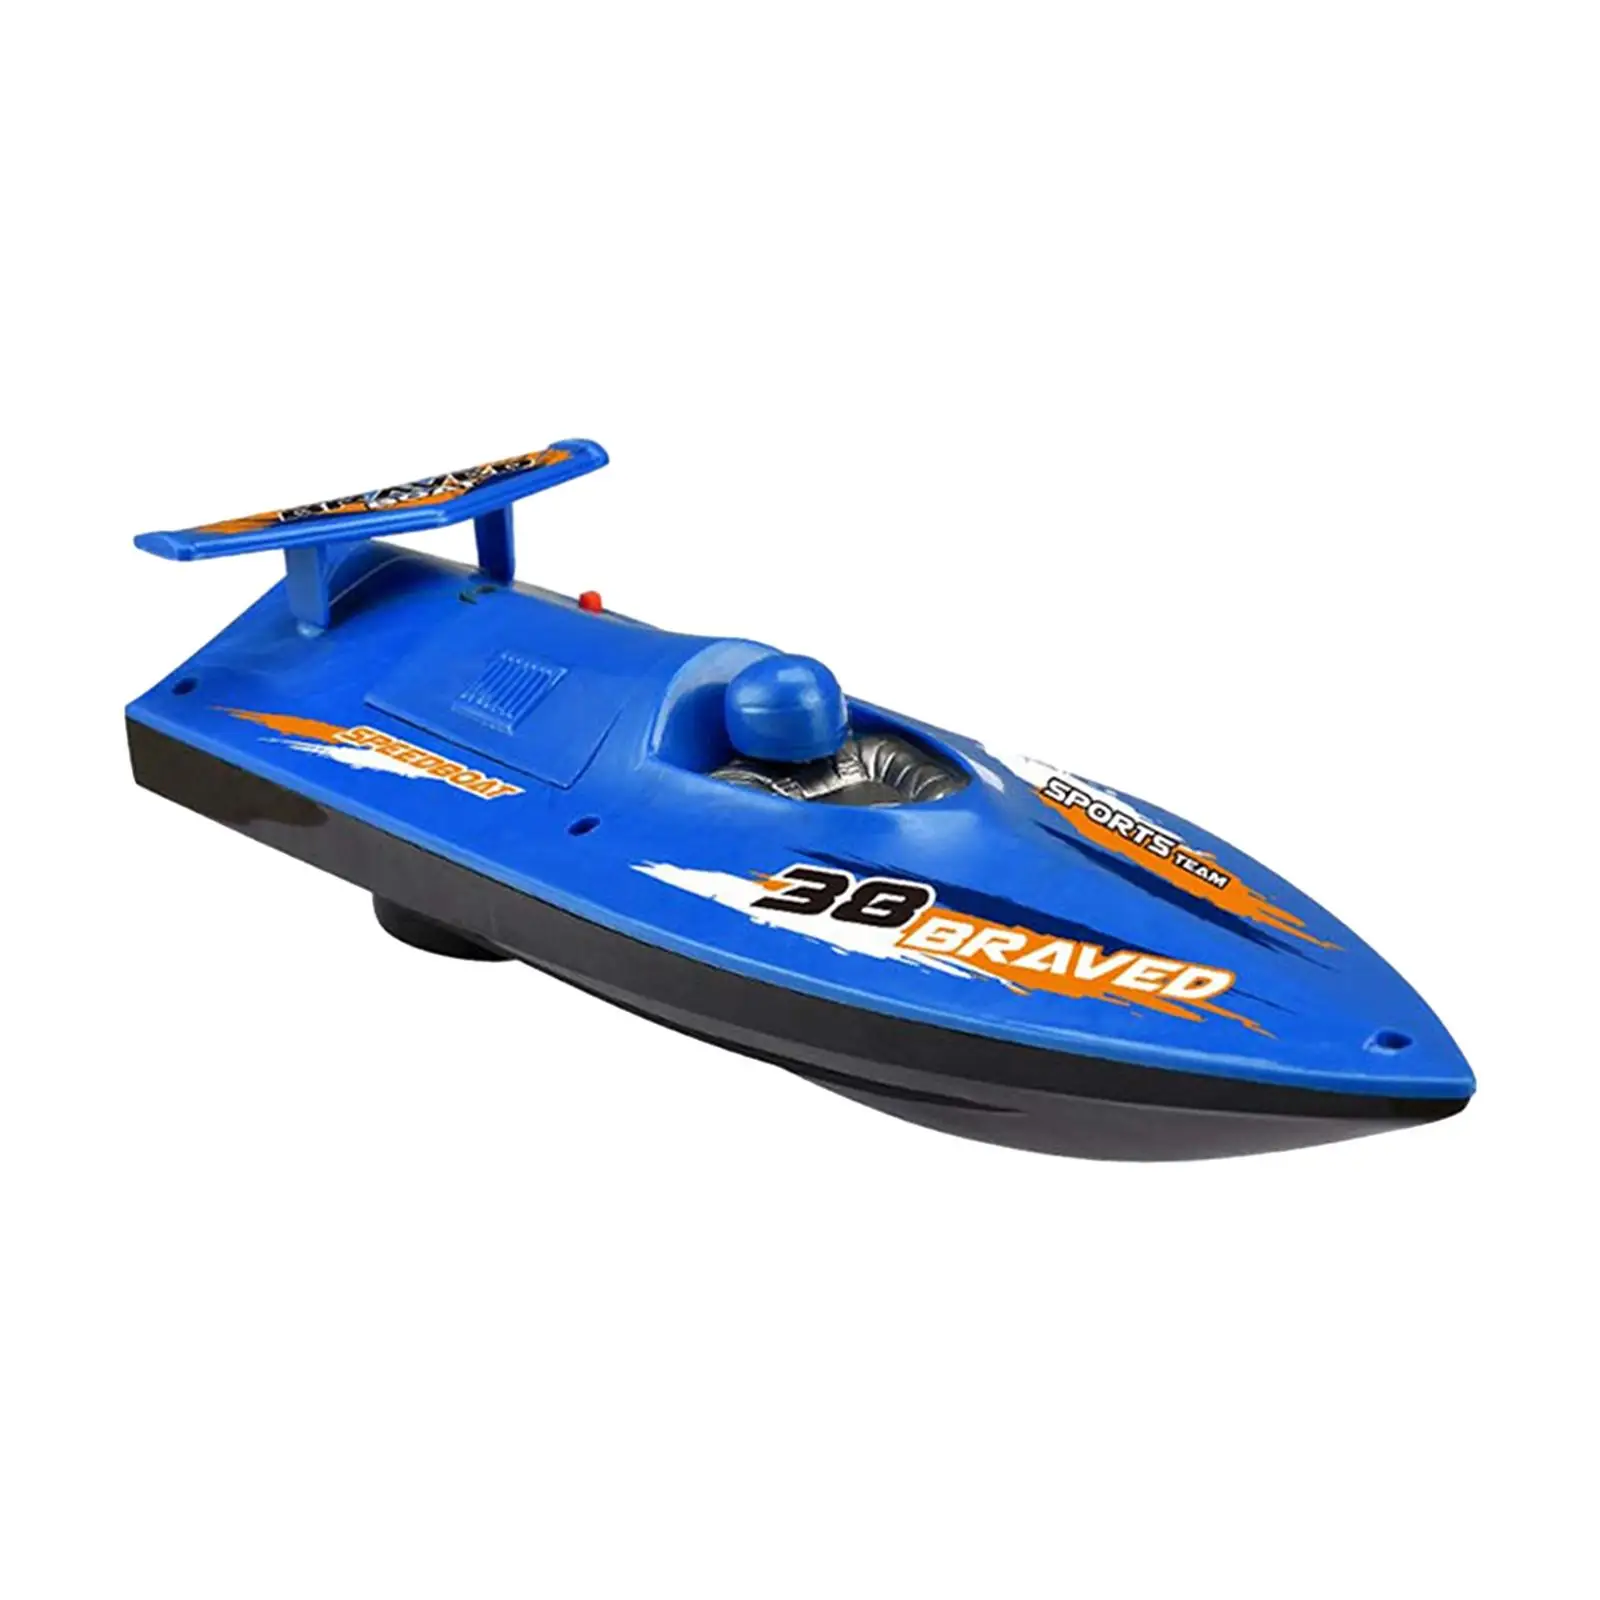 Yacht Pool Toy Floating Toy Boats, Motorboat Speed Boat Bathtub Toy, Bath Boat Toy for Outdoor Child Boys Girls Infant